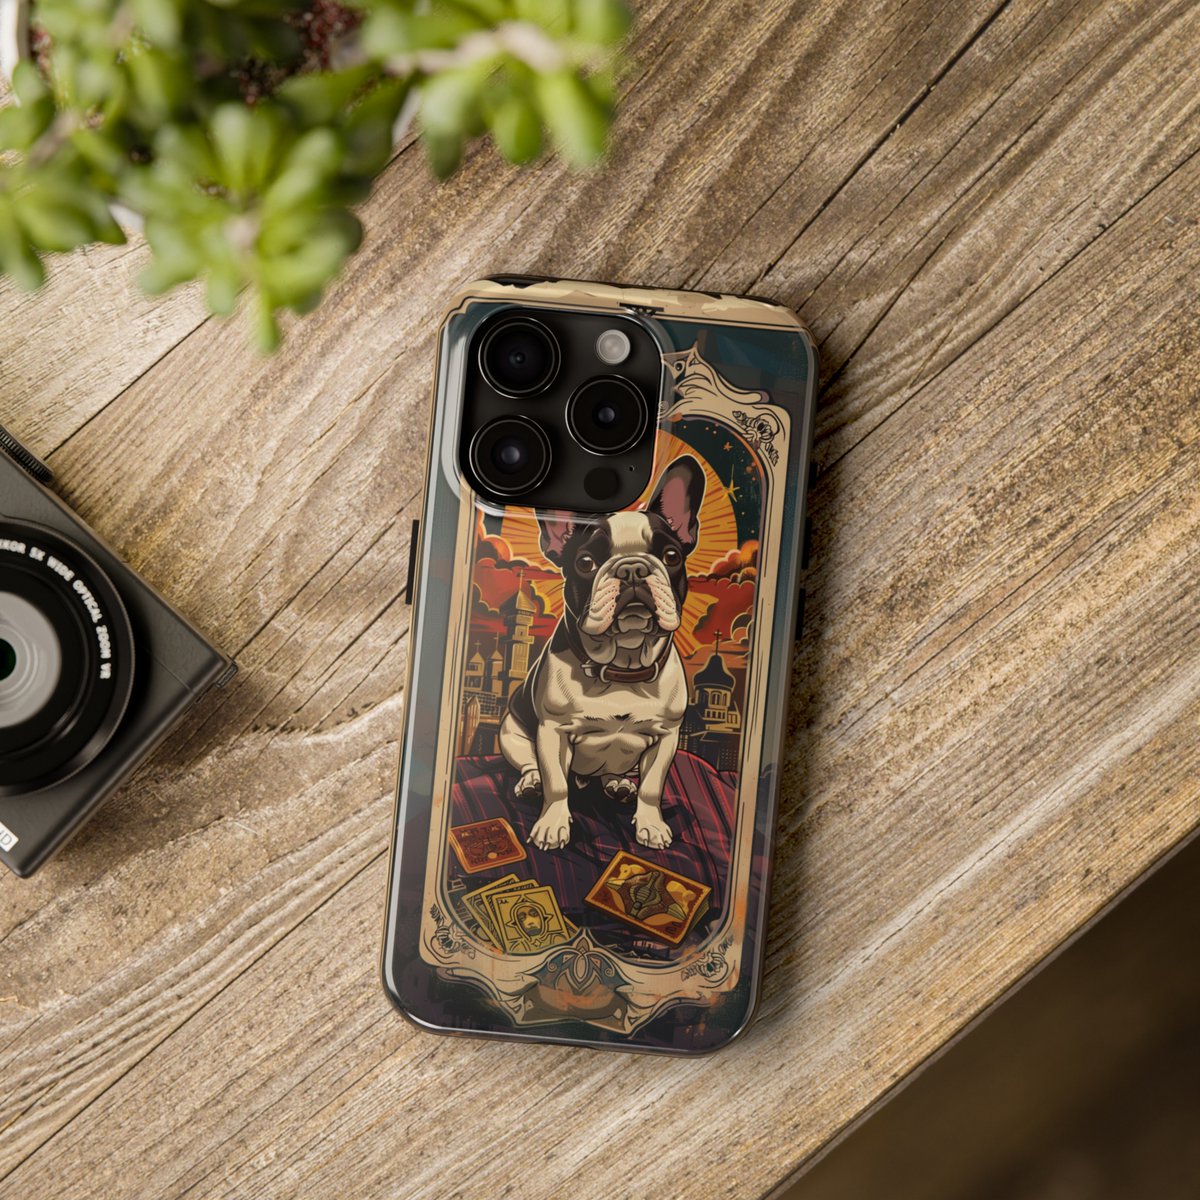 Tarot Card French Bulldog phone case for iPhone - Link in Bio!
#phonecase #iphonecase #aestheticphonecase 
#gift #giftformom #giftfordad #giftforhim #giftforher 
#tarot #tarotcards #frenchie #frenchieworld #frenchbulldog #frenchbulldoglife 
#frenchbulldogpuppy #frenchbulldoglove